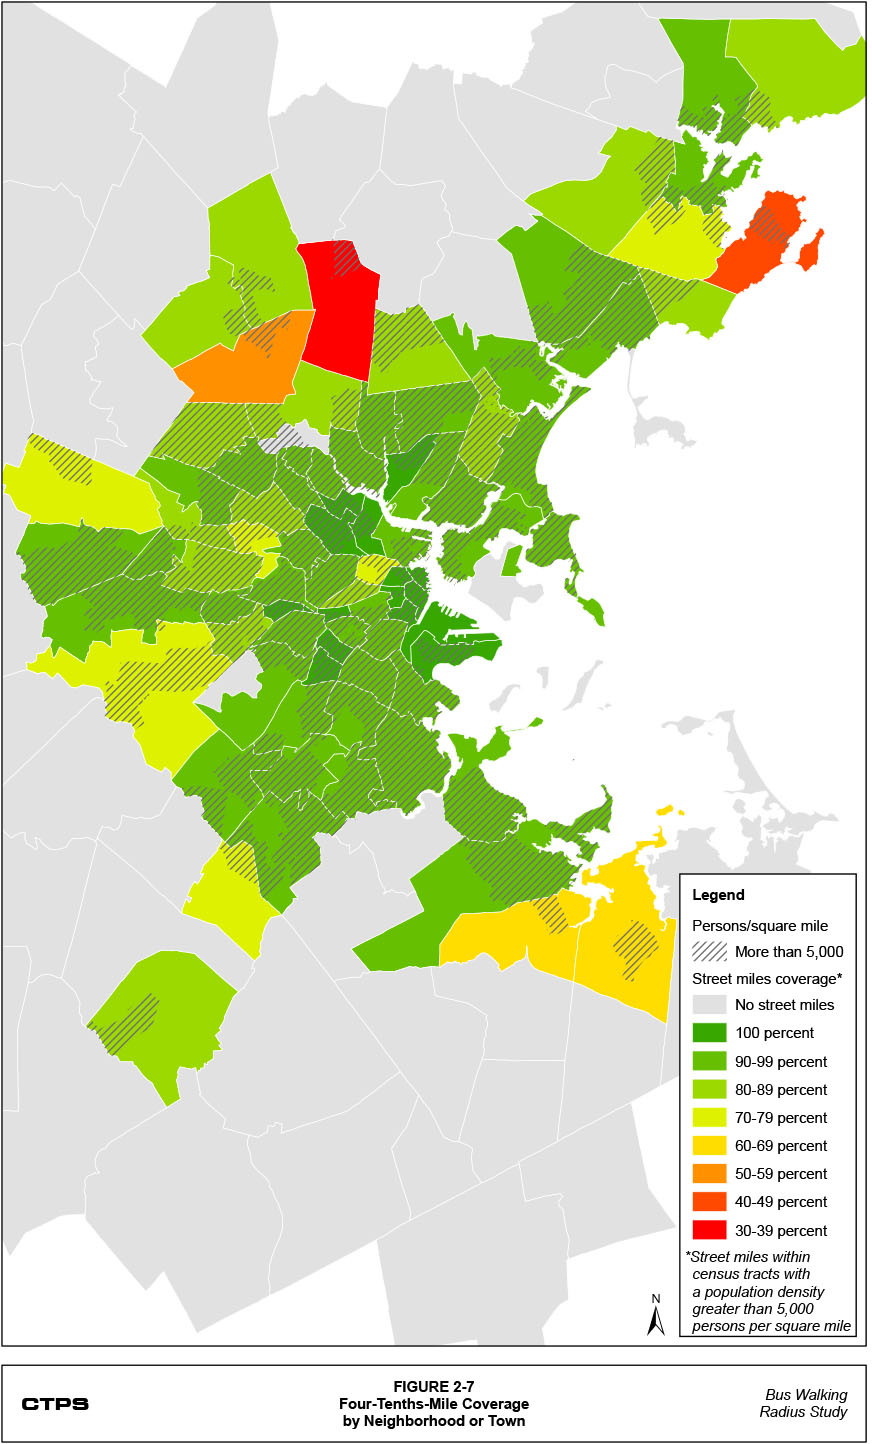 Four-Tenths-Mile Coverage by Neighborhood or Town. This is a map that shows the location of census tracts with a population density greater than 5,000 persons per square mile. It also shows, for each town that has at least one of these census tracts, that town’s street mile coverage.